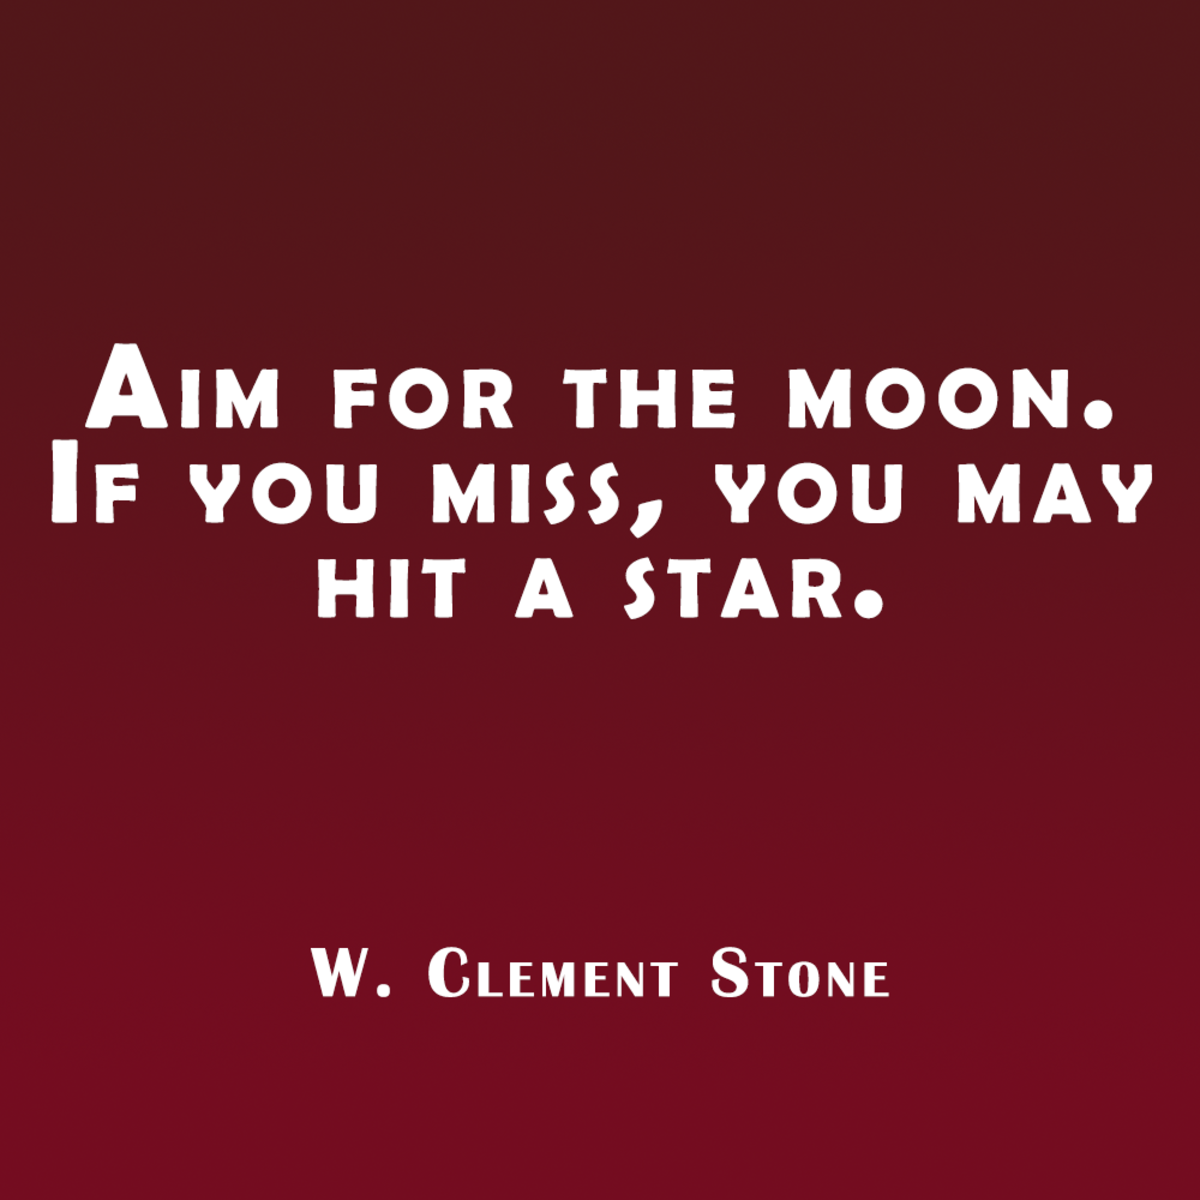 W. Clement Stone